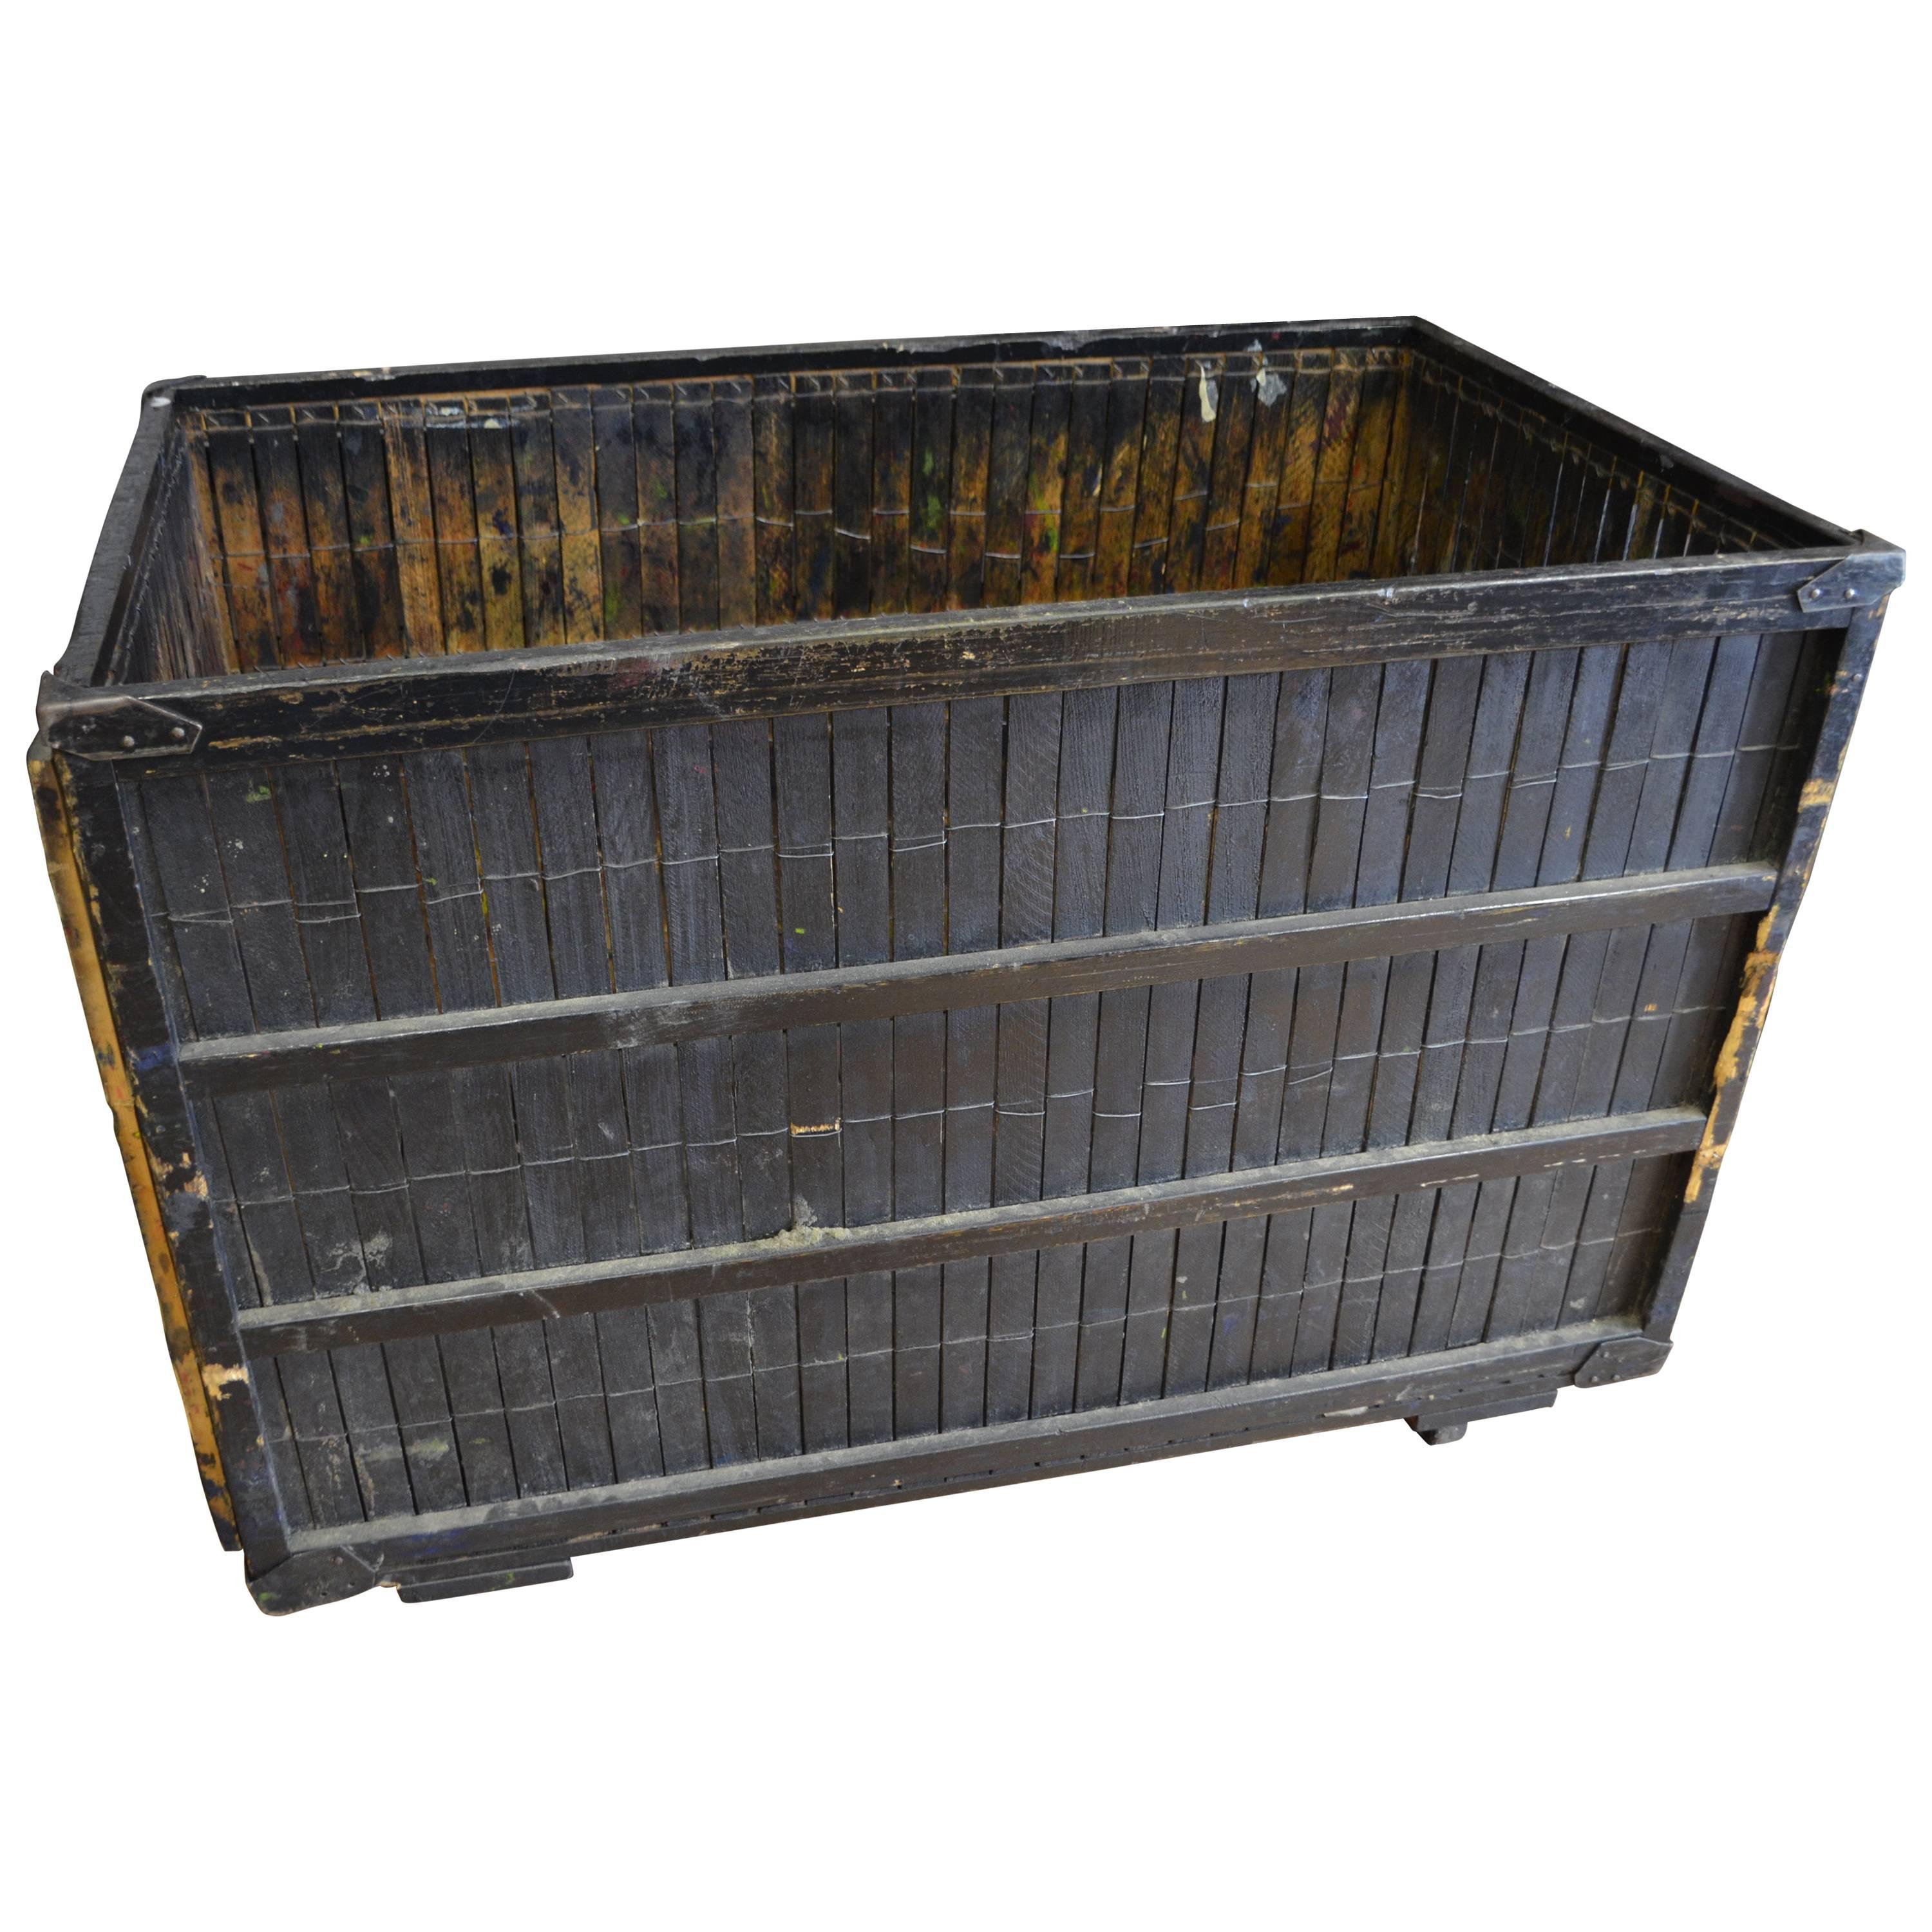 Mid-Century Crate on Wheels from Newspaper Printing Plant